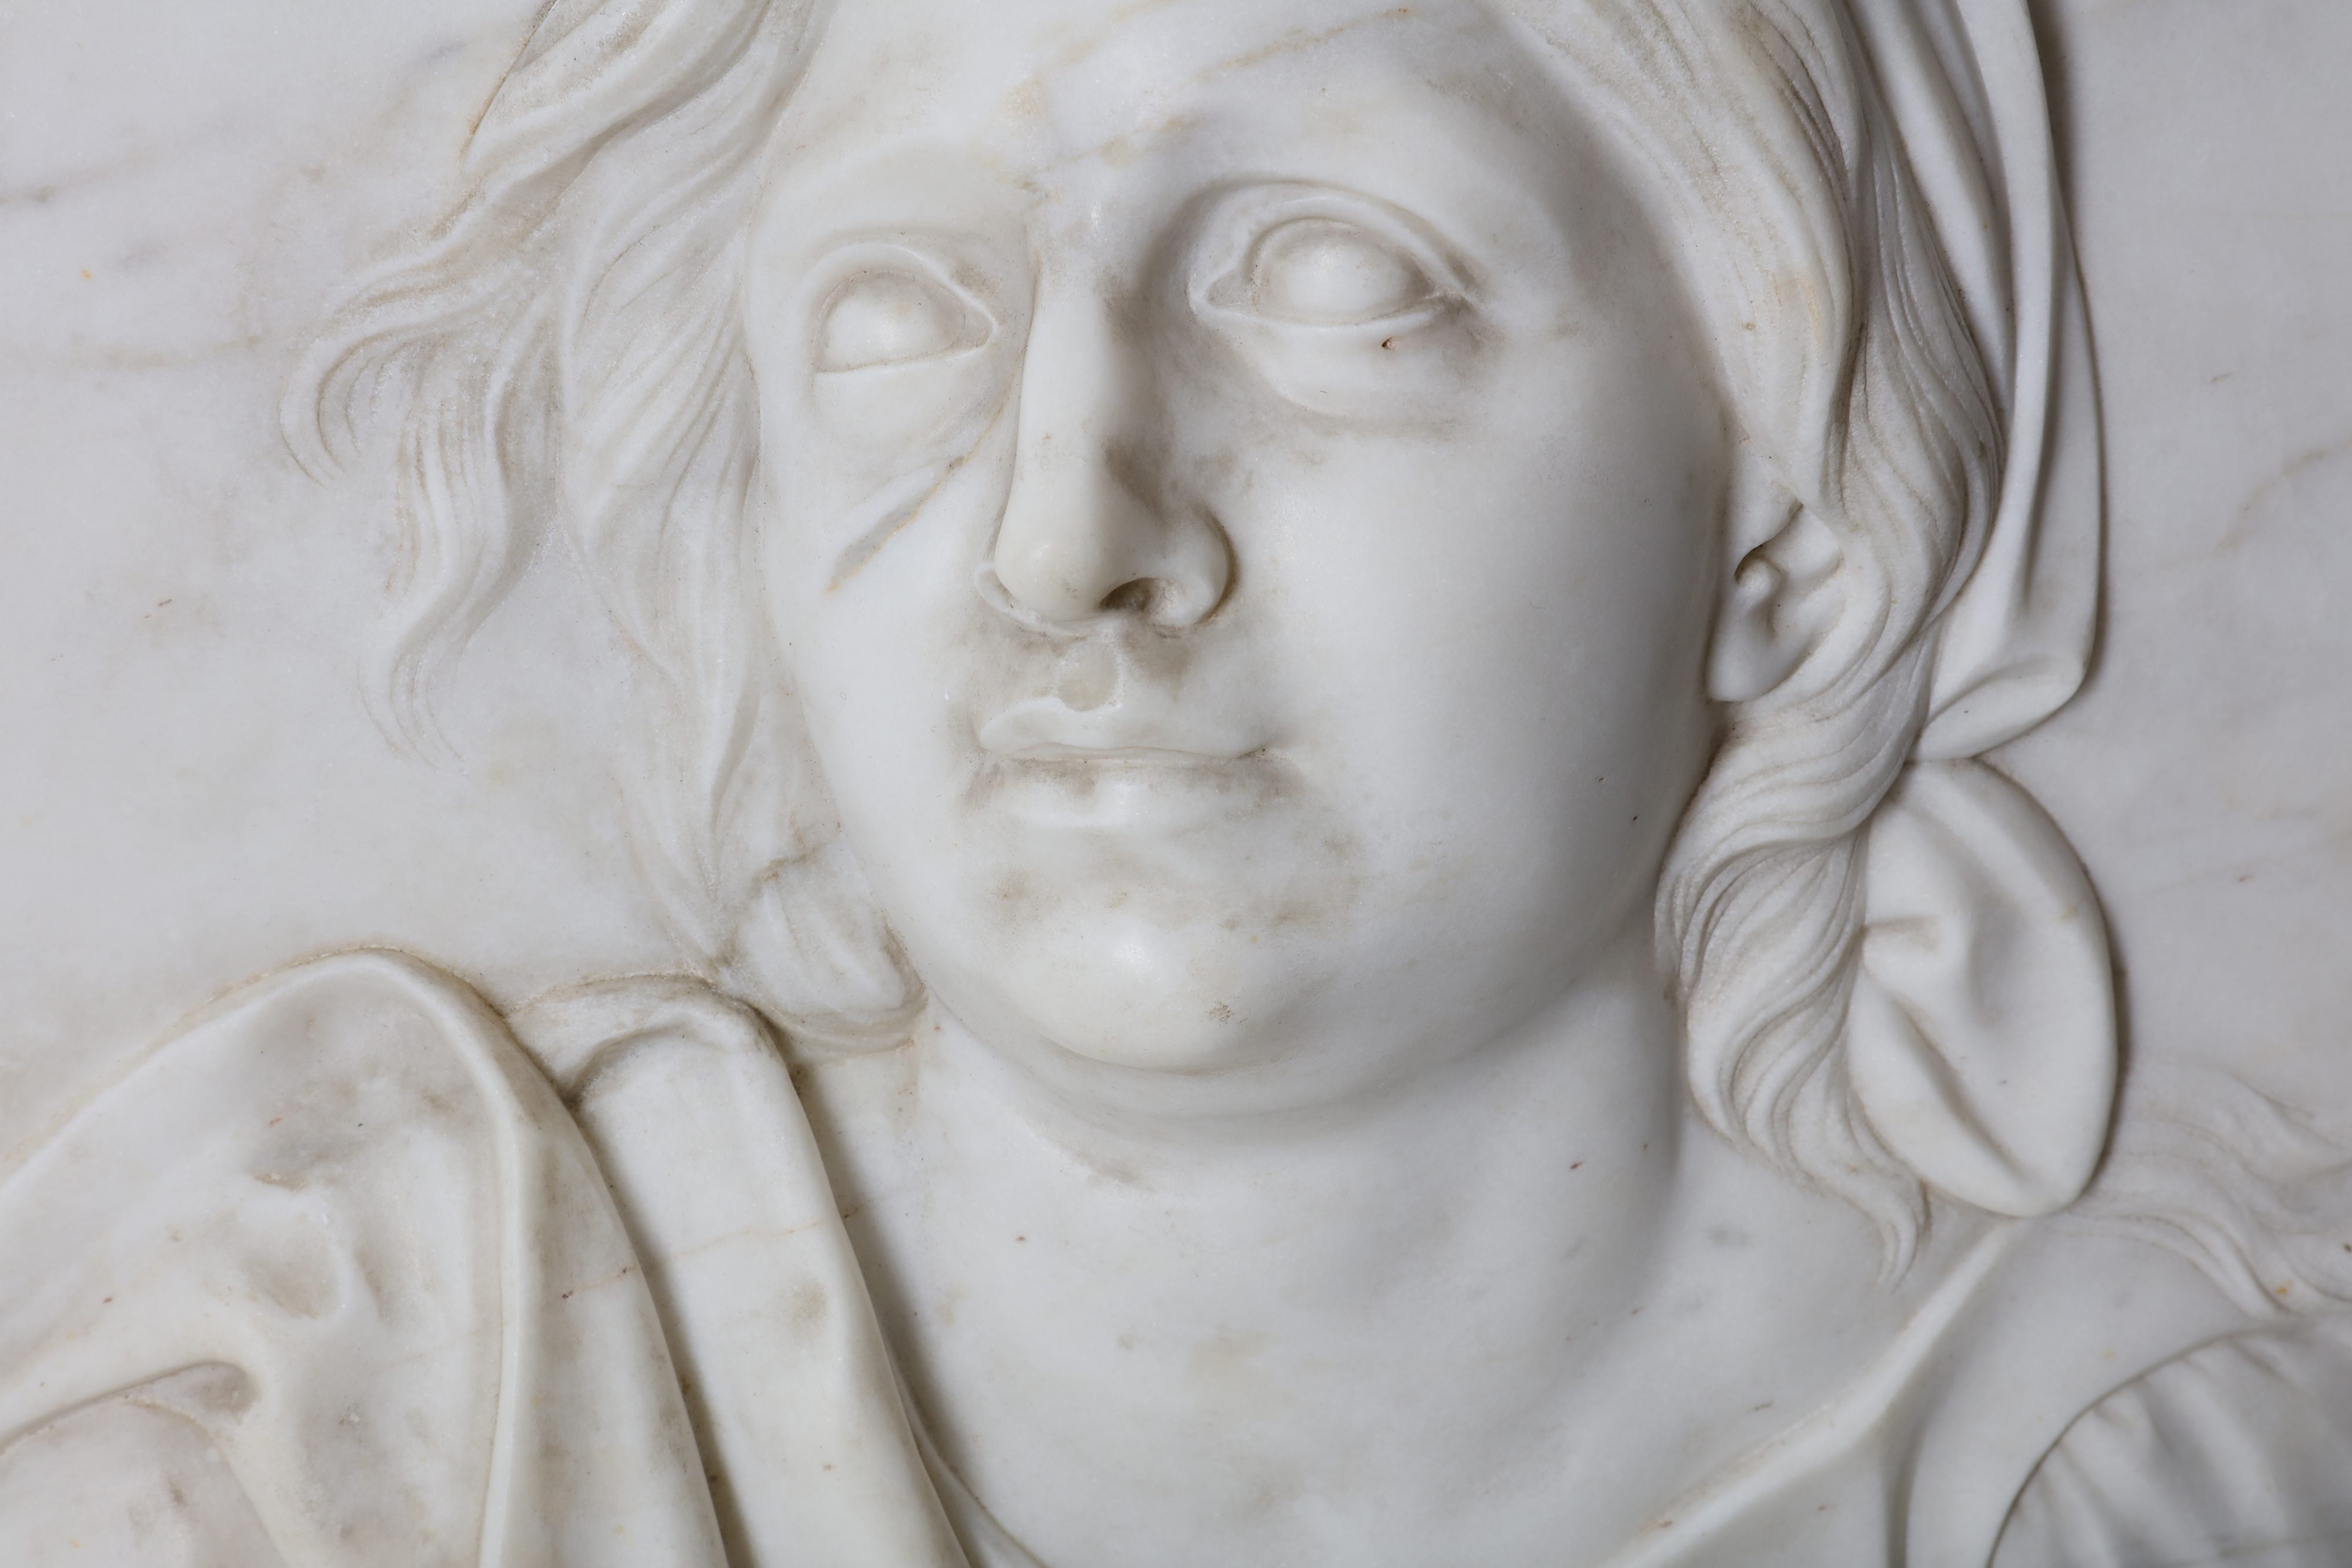 A PAIR OF ITALIAN 18TH CENTURY MARBLE RELIEFS DEPICTING CHRIST AND THE MOURNING VIRGIN IN THE MANNER - Image 9 of 11